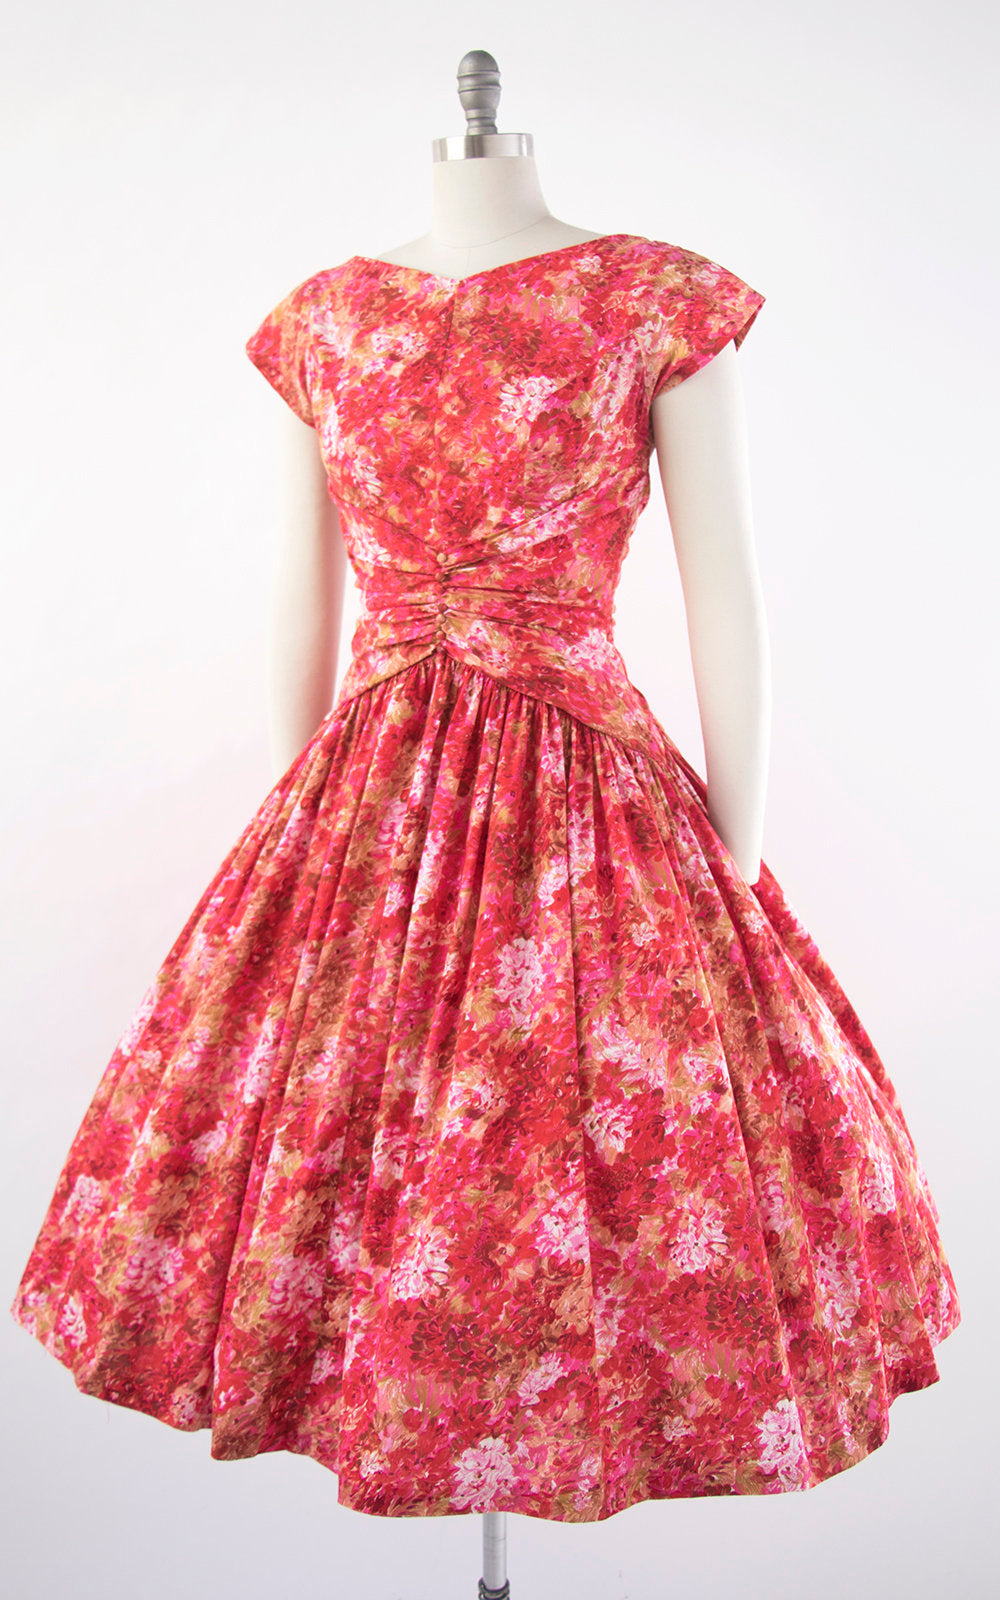 Vintage 1950s Dress | 50s Floral Cotton Pink Full Skirt Pleated Drop Waist Bow Party Dress (medium)